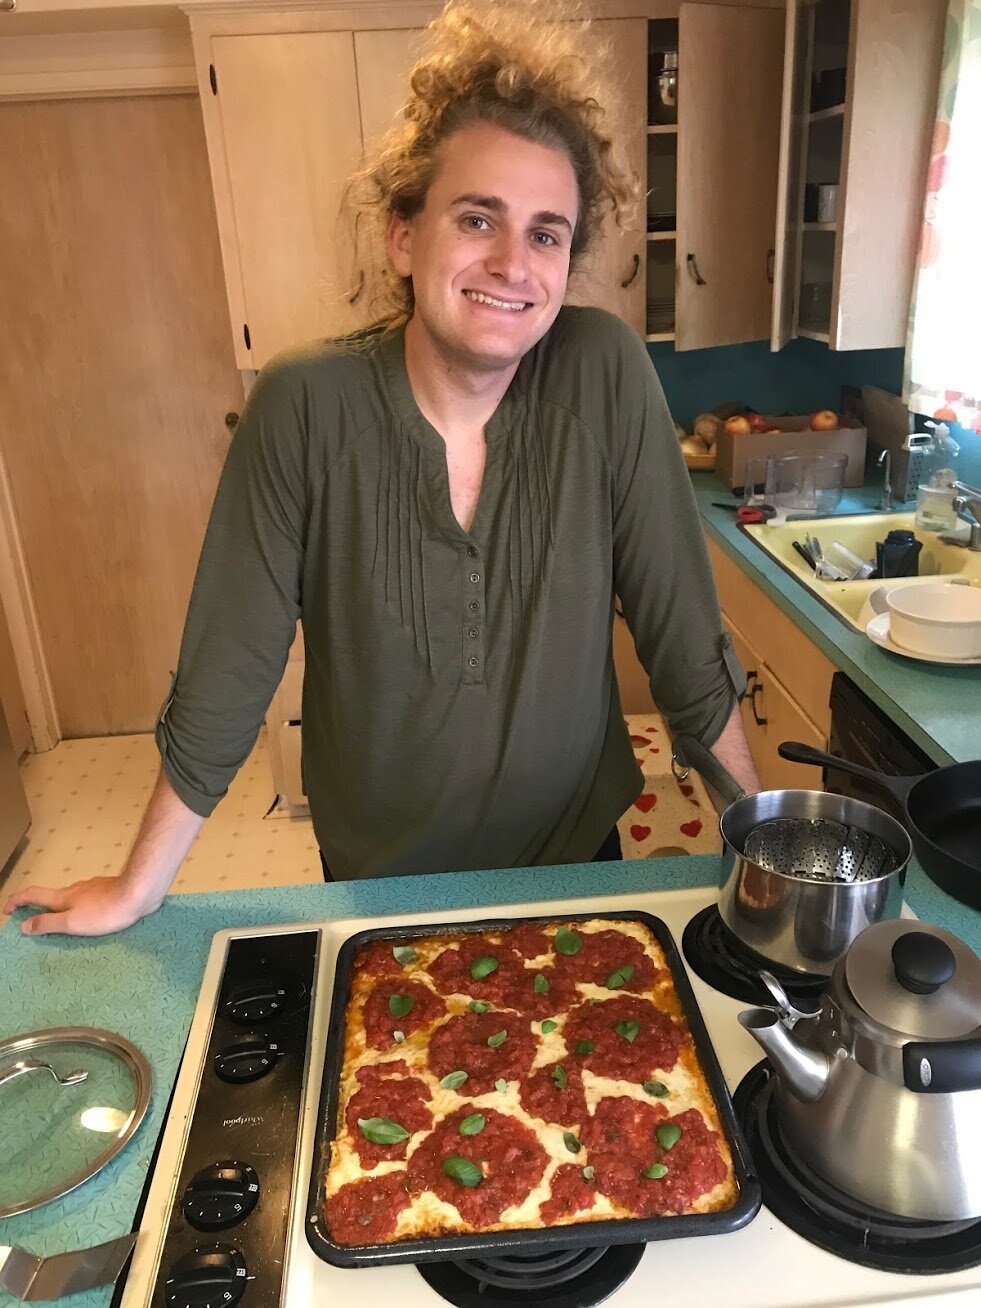 Brieen Hayes showing of pizza they baked.